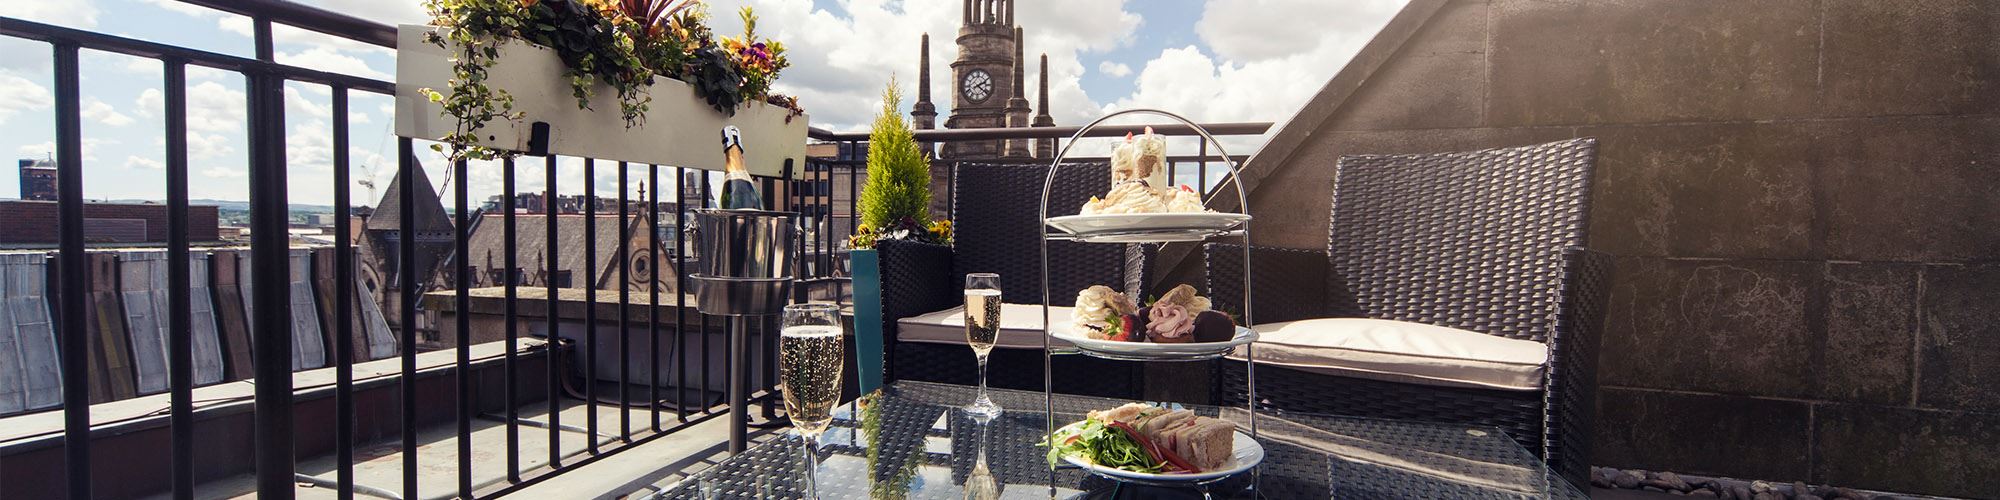 Afternoon tea with prosecco served on a rooftop balcony